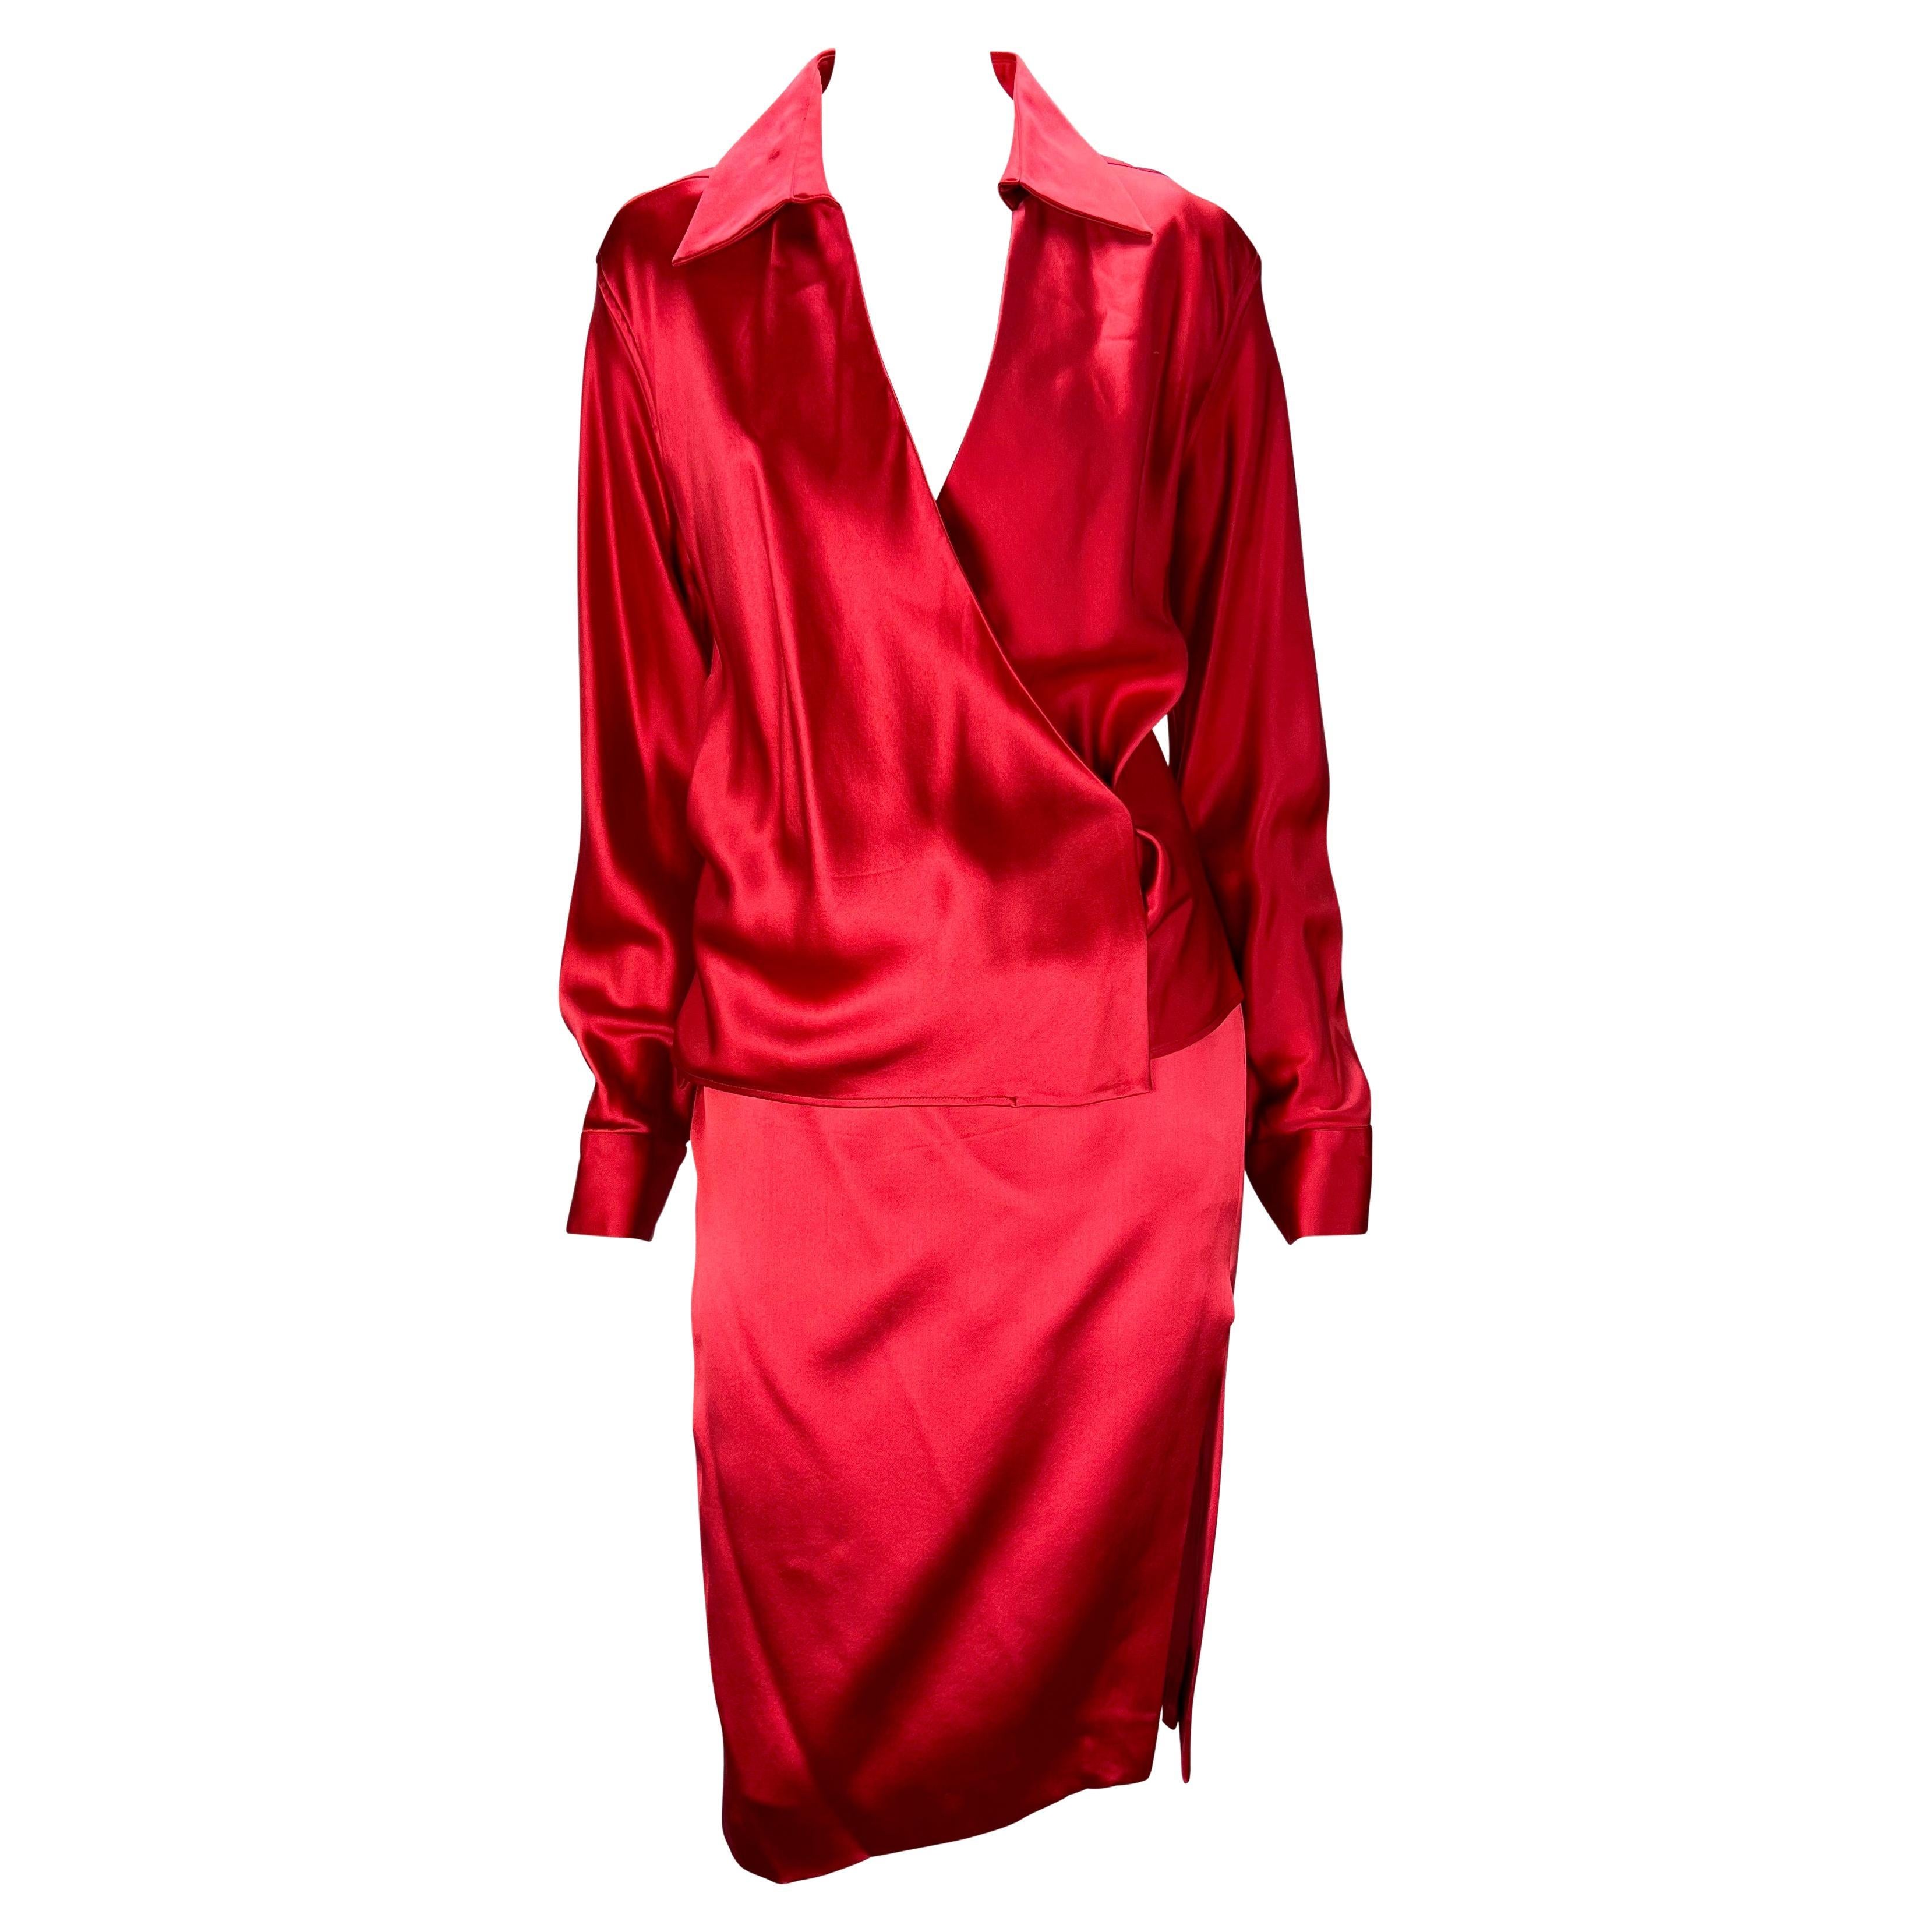 Presenting an absolutely stunning red satin Gucci skirt set, designed by Tom Ford. From the Spring/Summer 2001 collection, this two-piece set is made up of a pencil skirt and matching wrap blouse. Both pieces are constructed of a luxurious satin